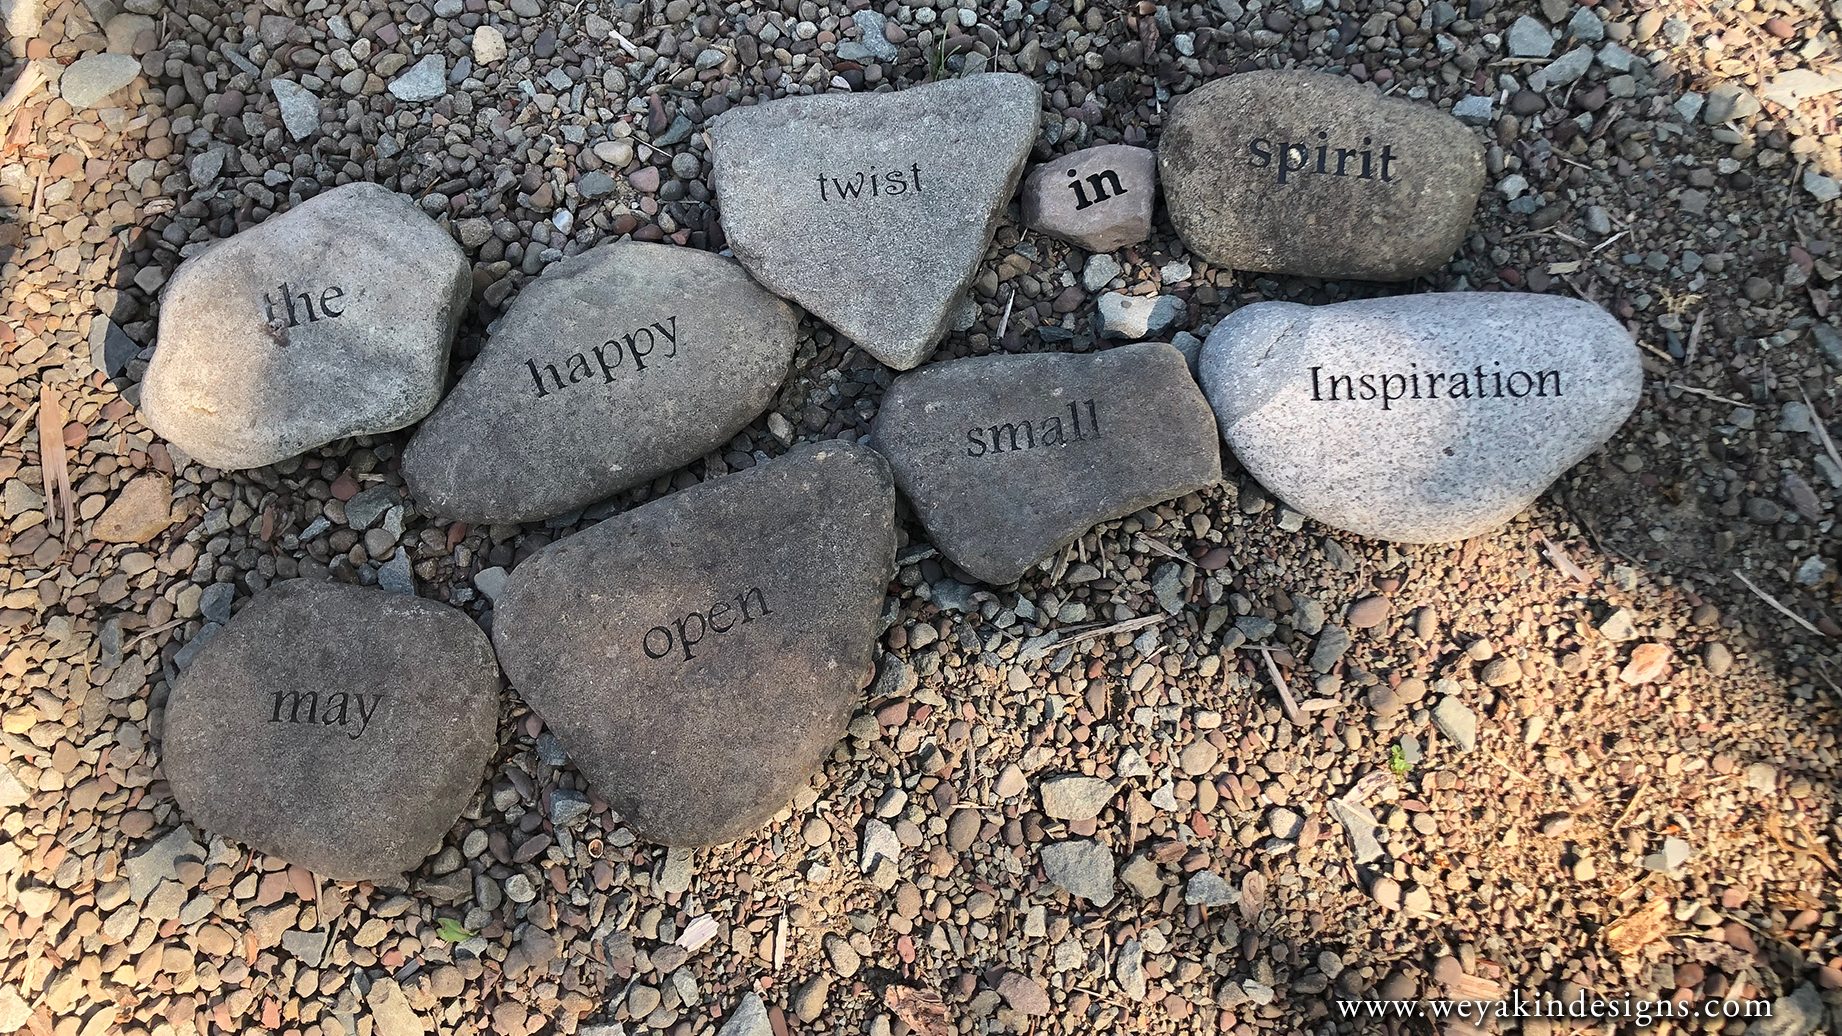 Stones on the ground that read, "the happy twist in spirit may open small inspiration" in the Word Garden at The Highlights Foundation. Poem and photo by Victoria K. Chapman.